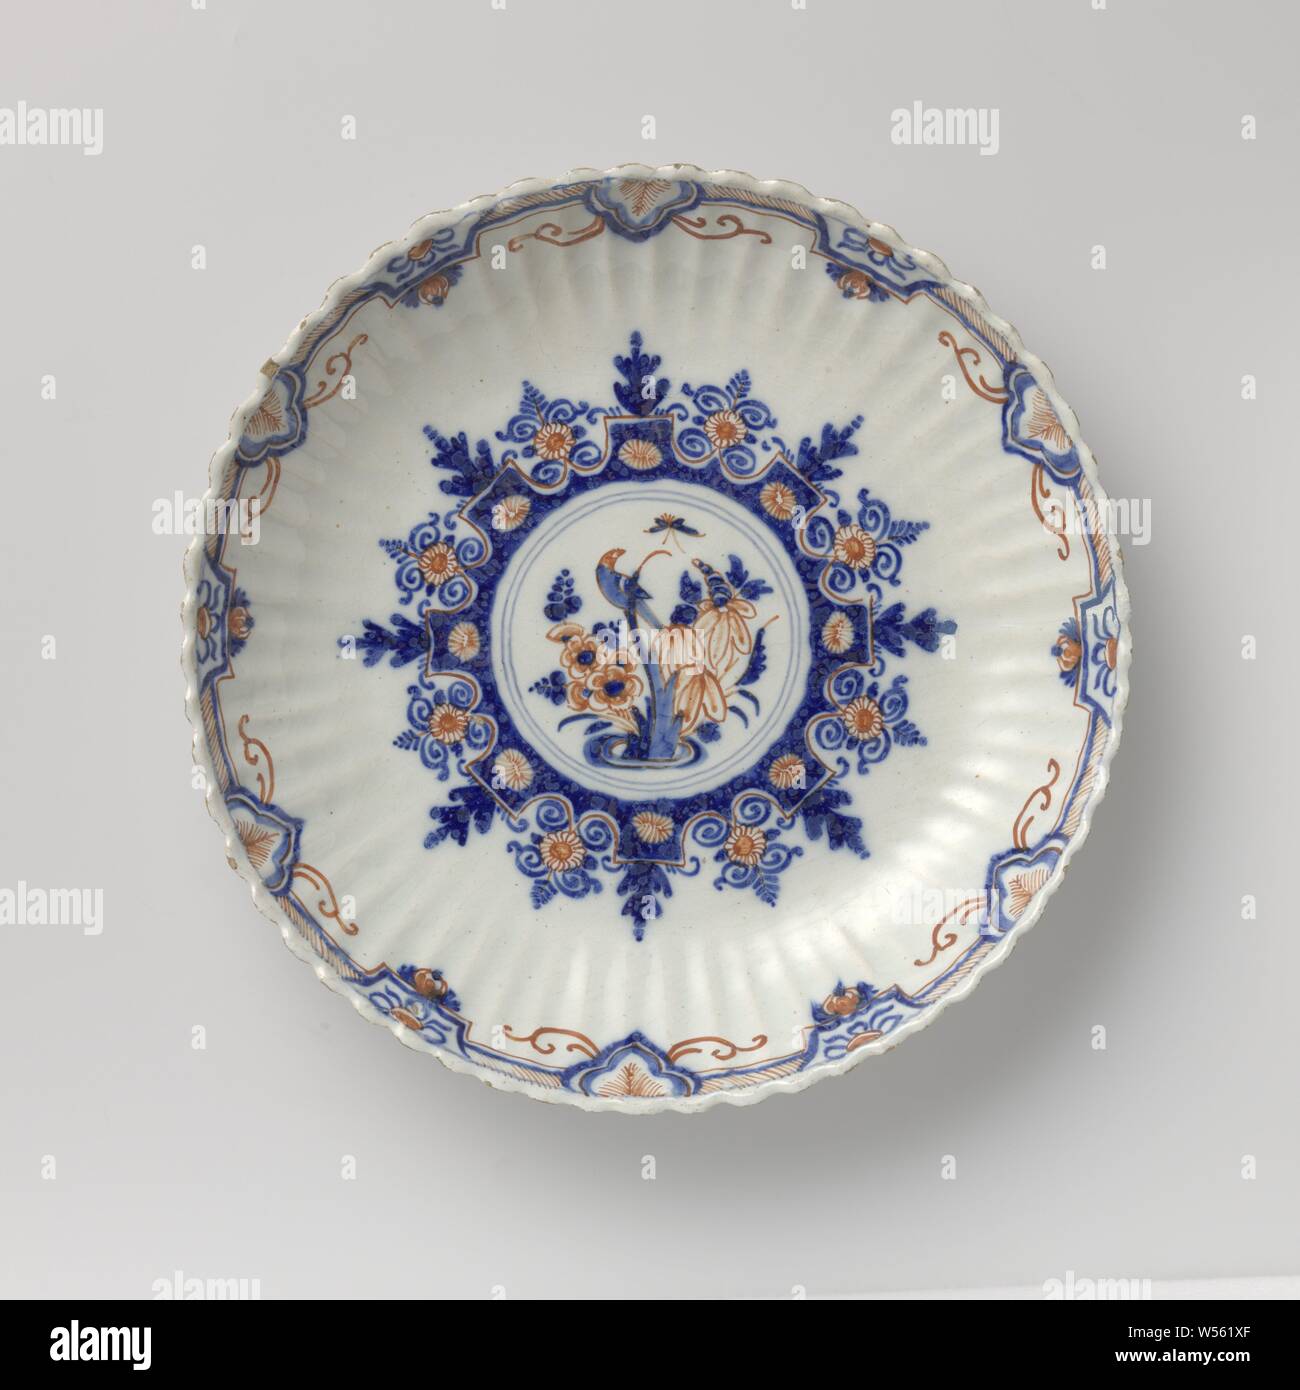 Dish of multicolored painted faience, Dish of faience. To Rouen example. Multicolored painted. The dish is marked., De Dubbele Schenkkan, Delft, c. 1700 - c. 1730, d 26.8 cm × h 5.7 cm Stock Photo